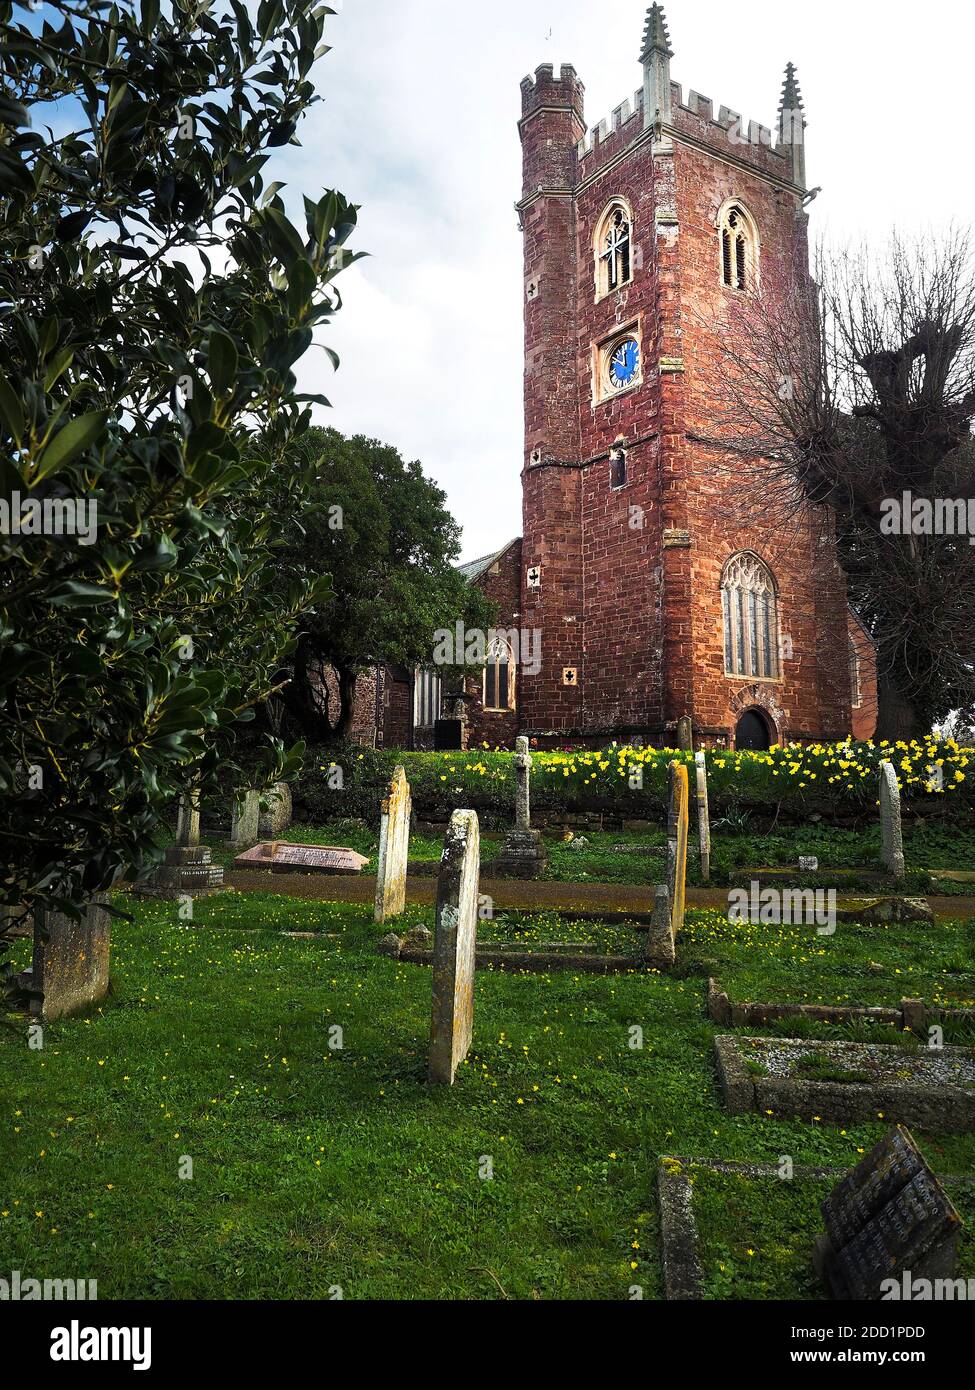 The church of St Michael and All Angels, Alphington is within a former manor and village, now a suburb of the City of Exeter in Devon. Stock Photo